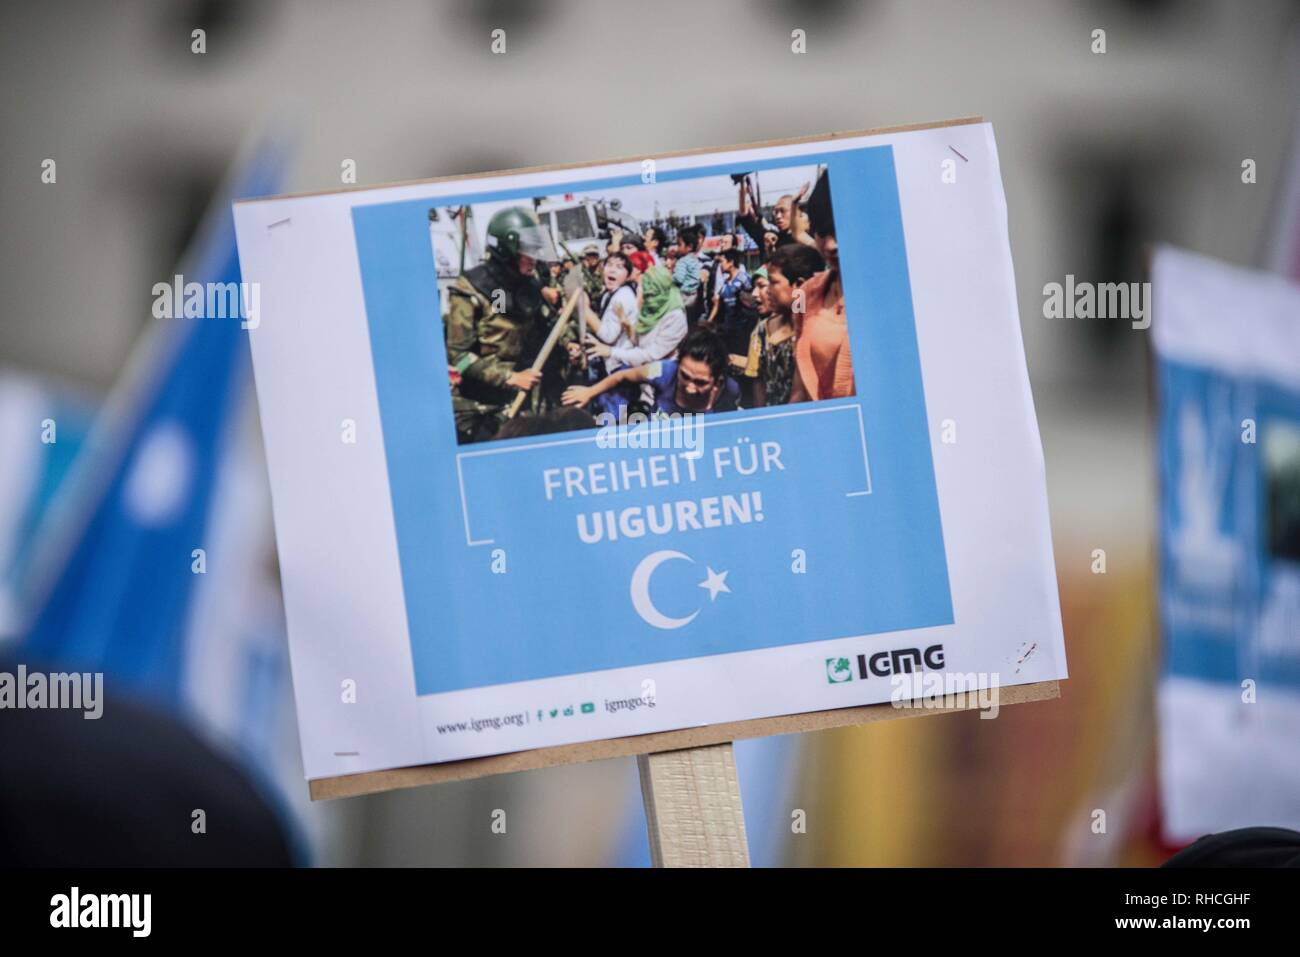 Munich, Bavaria, Germany. 2nd Feb, 2019. ''Freedom for the Uyghurs''. to protest against the so-called 'Muslim Crackdown'' by the Chinese Communist Party in the Xinjiang Autonomous Region of China. The region is contains roughly 26 million people, 11 million of whom are the ethnically Turkic Uyghurs who still call the region East Turkistan . The CCP has placed upwards of 1 million Uyghurs in reeducation camps, as well as performing widespread surveillance of the non-Han residents. There are many repor Credit: ZUMA Credit: ZUMA Press, Inc./Alamy Live News Stock Photo